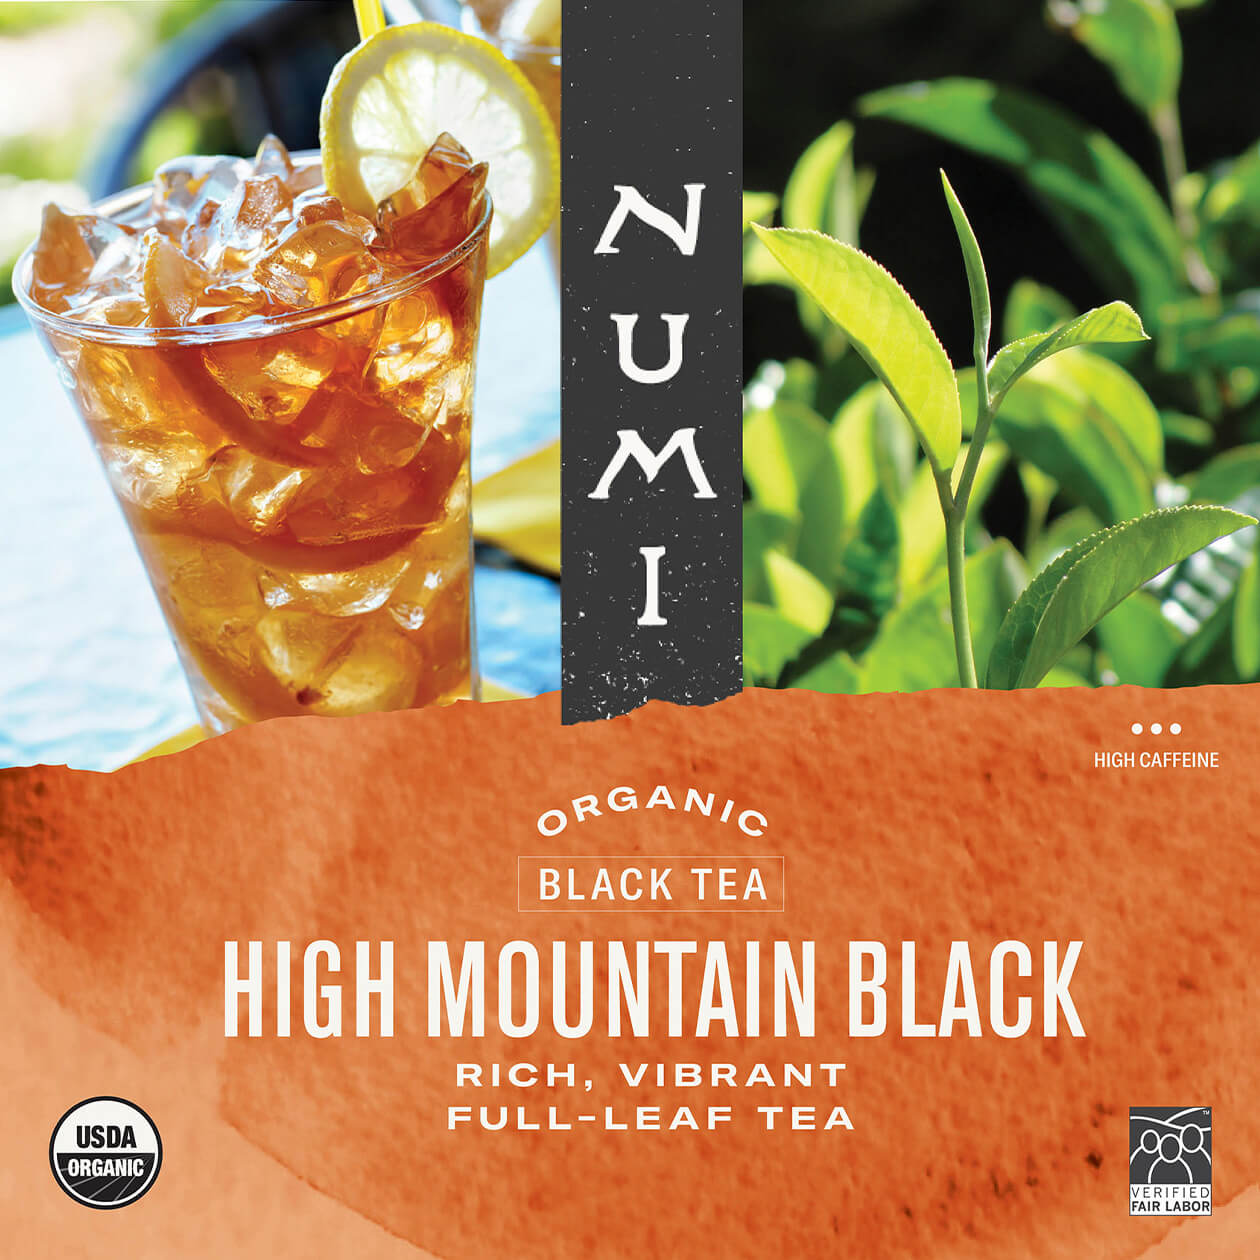 High Mountain Black Iced Tea label, organic and high caffeine, with images of iced tea and pure tea leaves